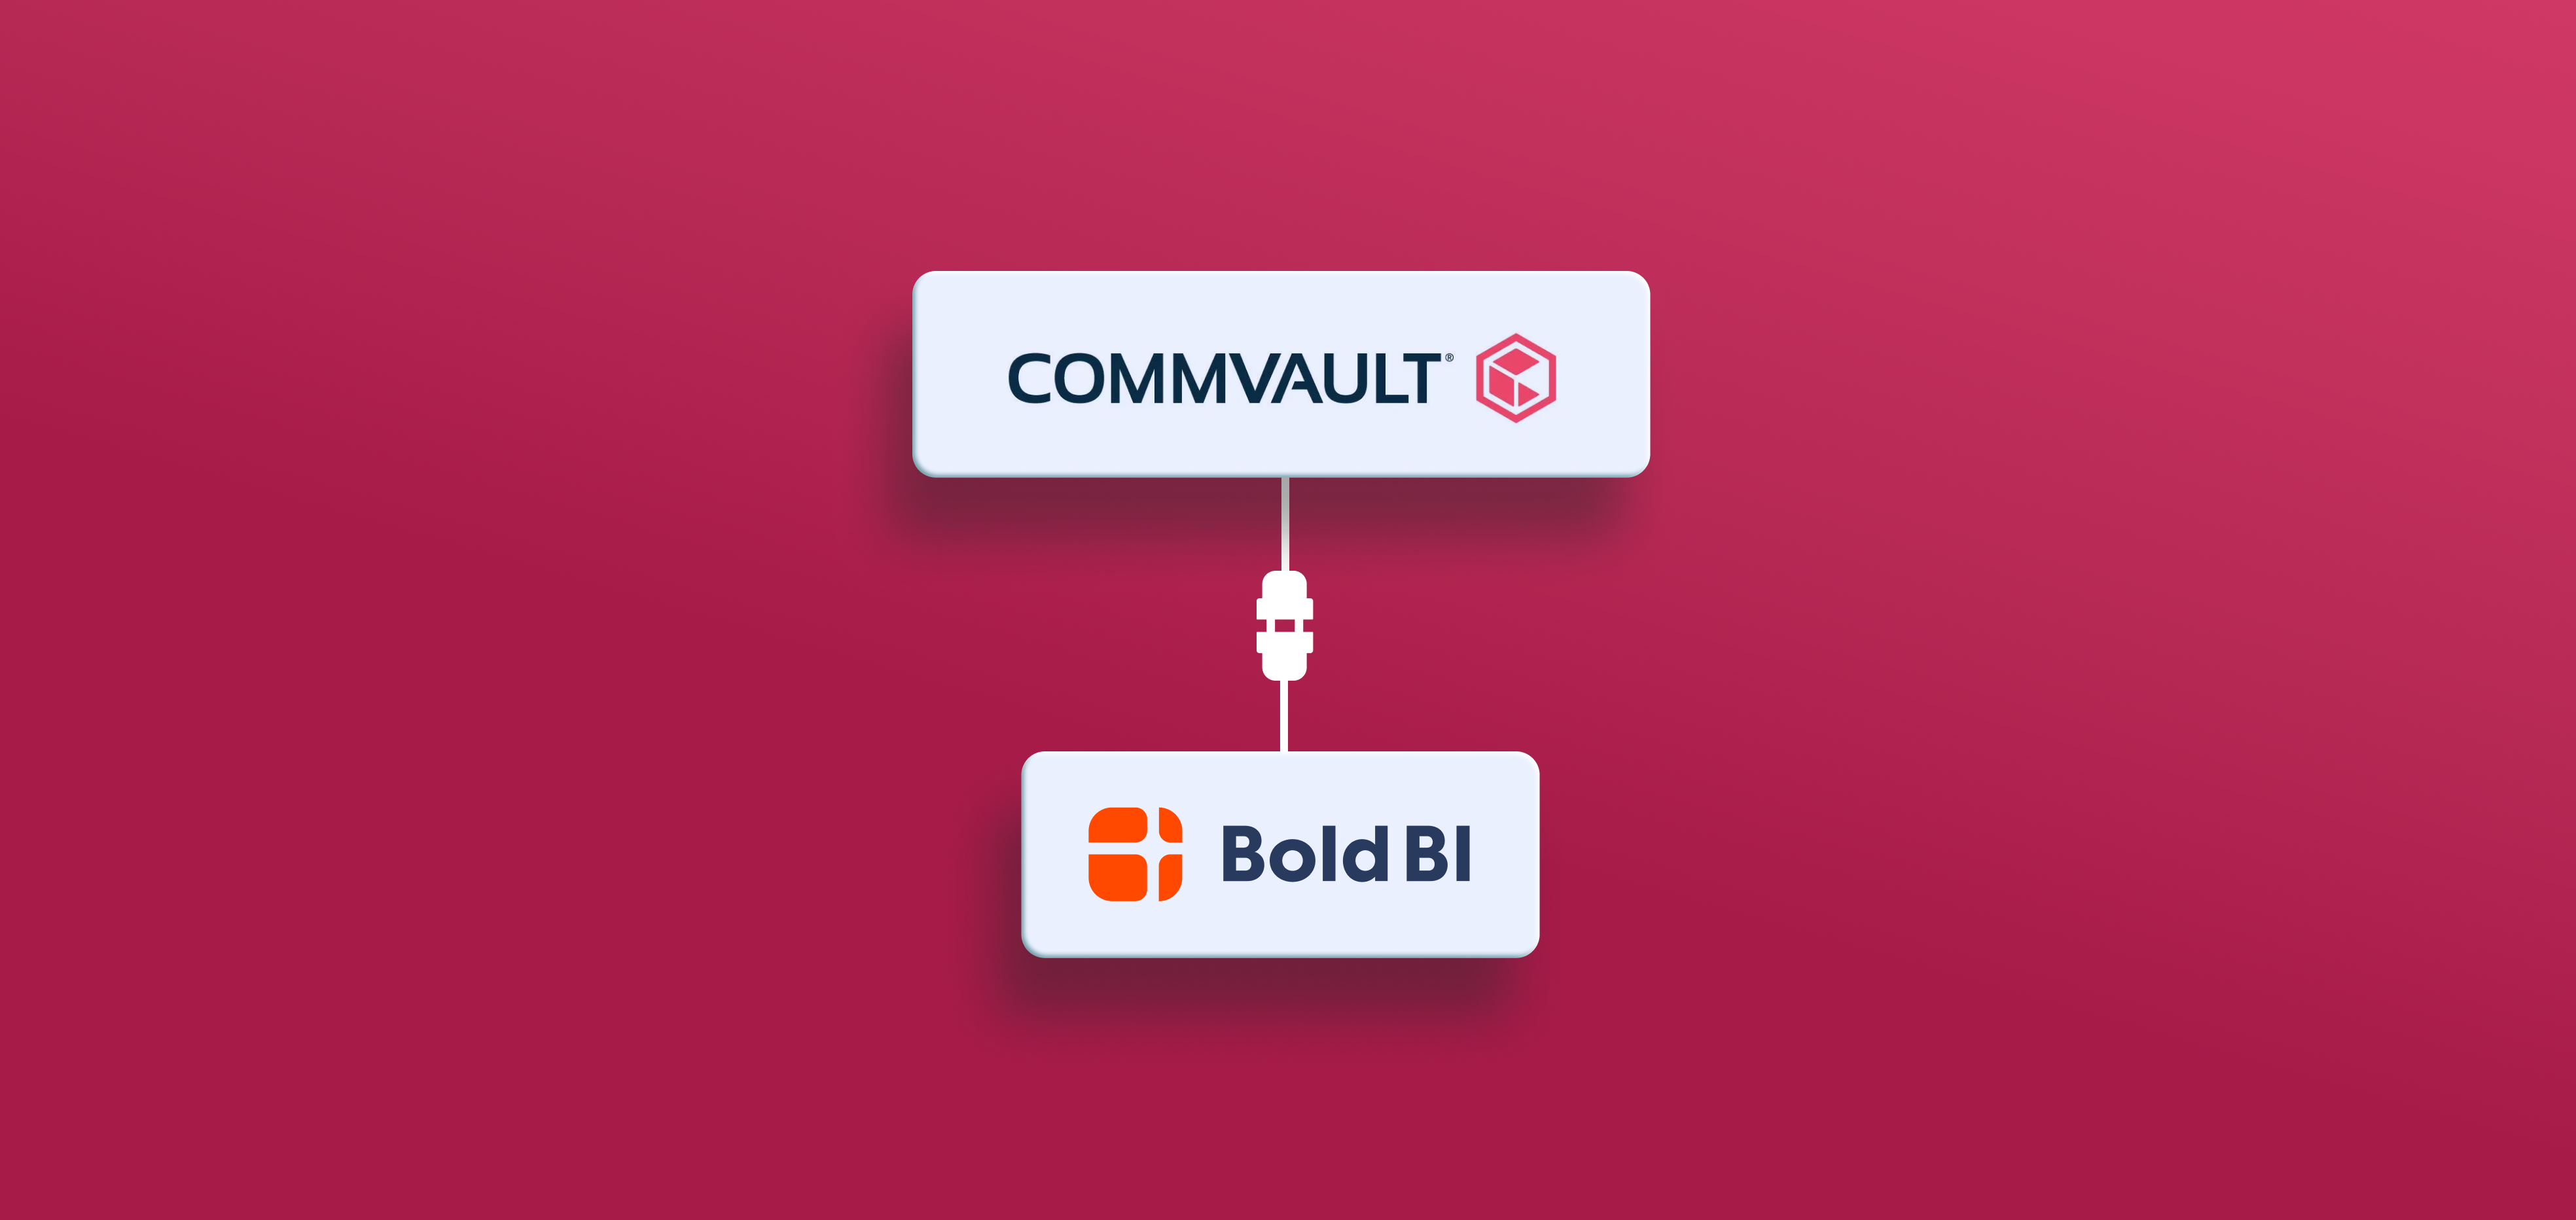 Connecting Bold BI to Commvault data source